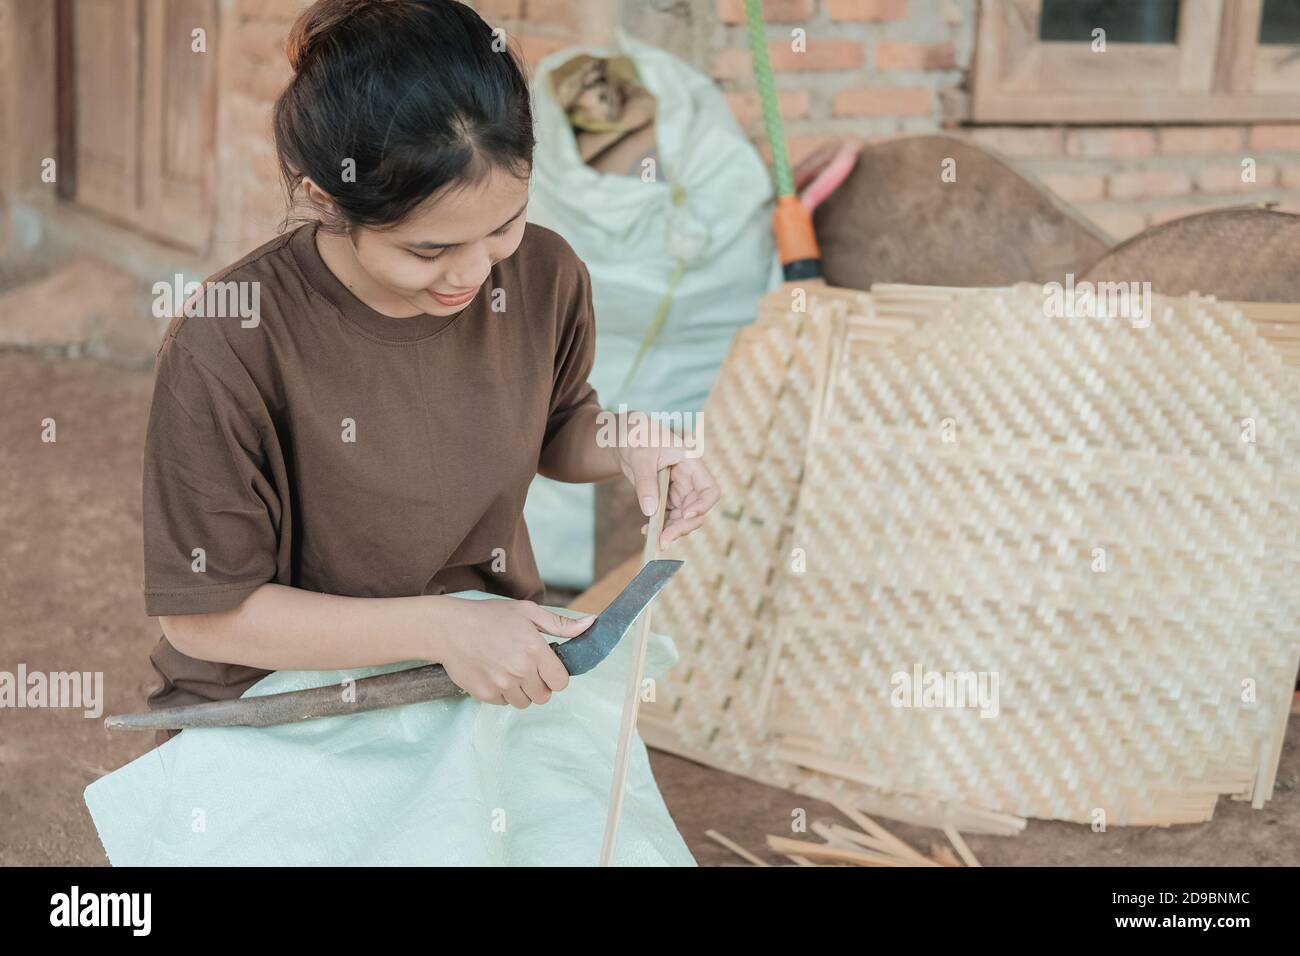 working women use knives to make bamboo mats at home Stock Photo